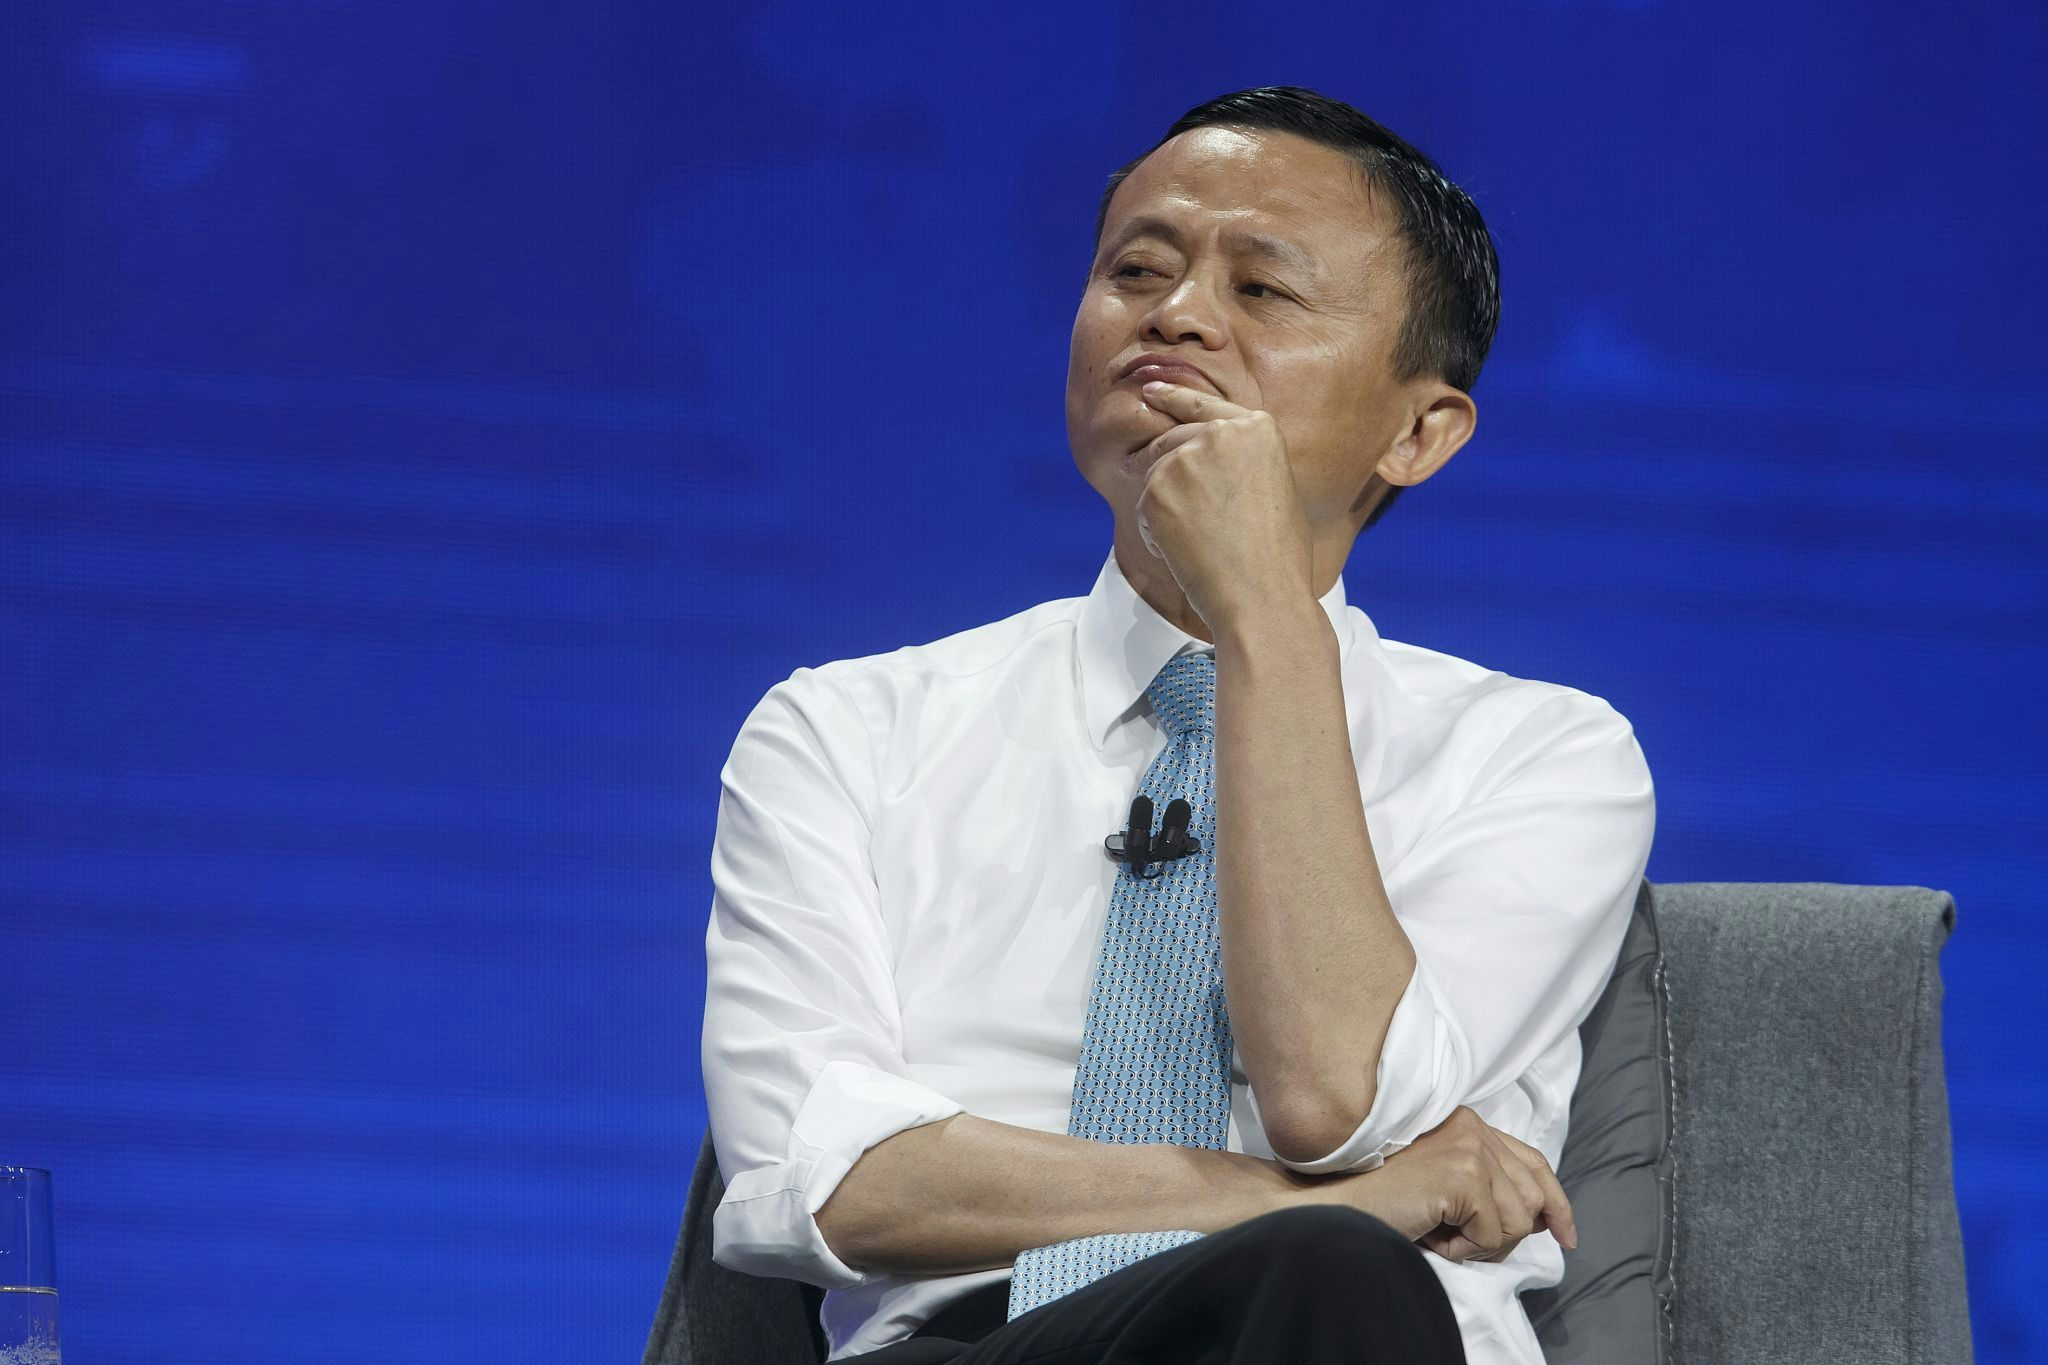 Trending: Jack Ma Says He Doesn't Have Time to Spend Money